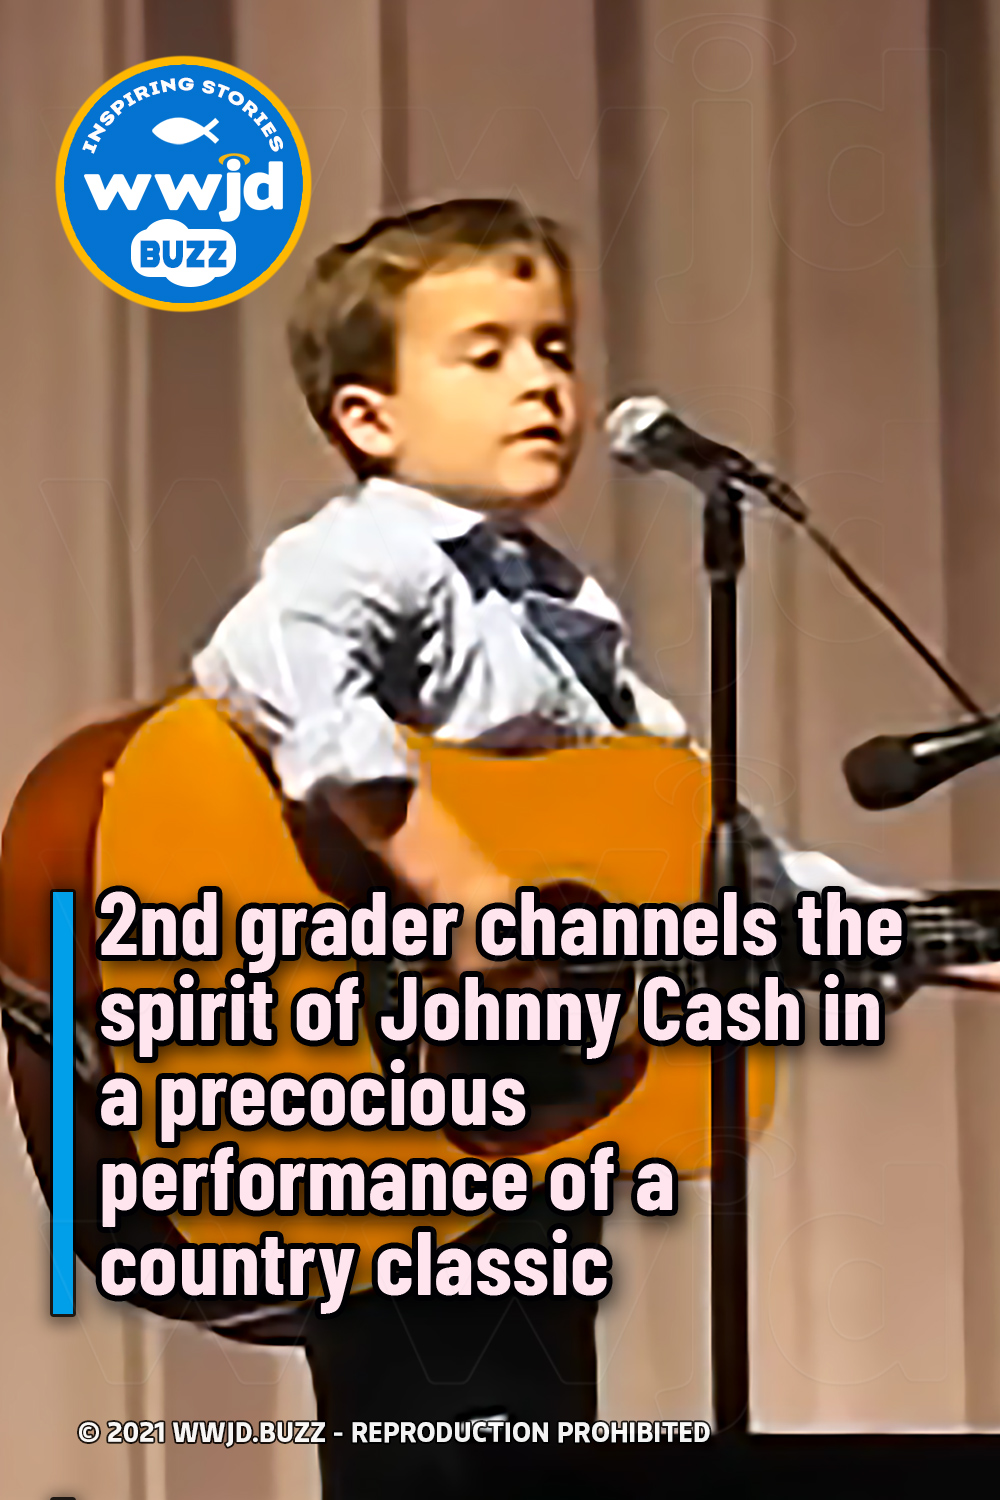 2nd grader channels the spirit of Johnny Cash in a precocious performance of a country classic